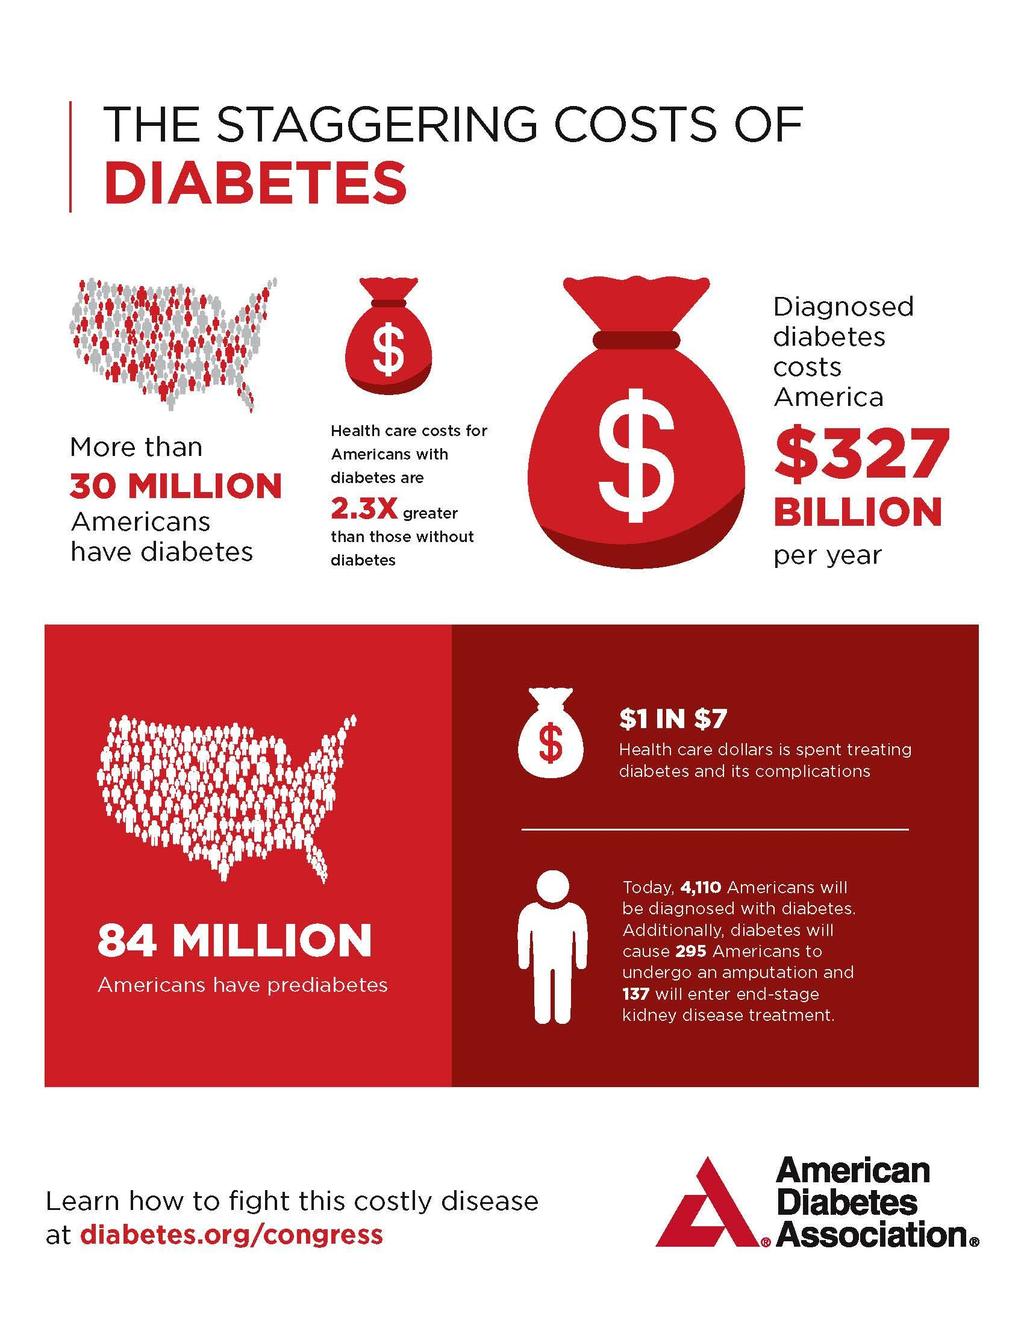 Over 30 million Americans with diabetes